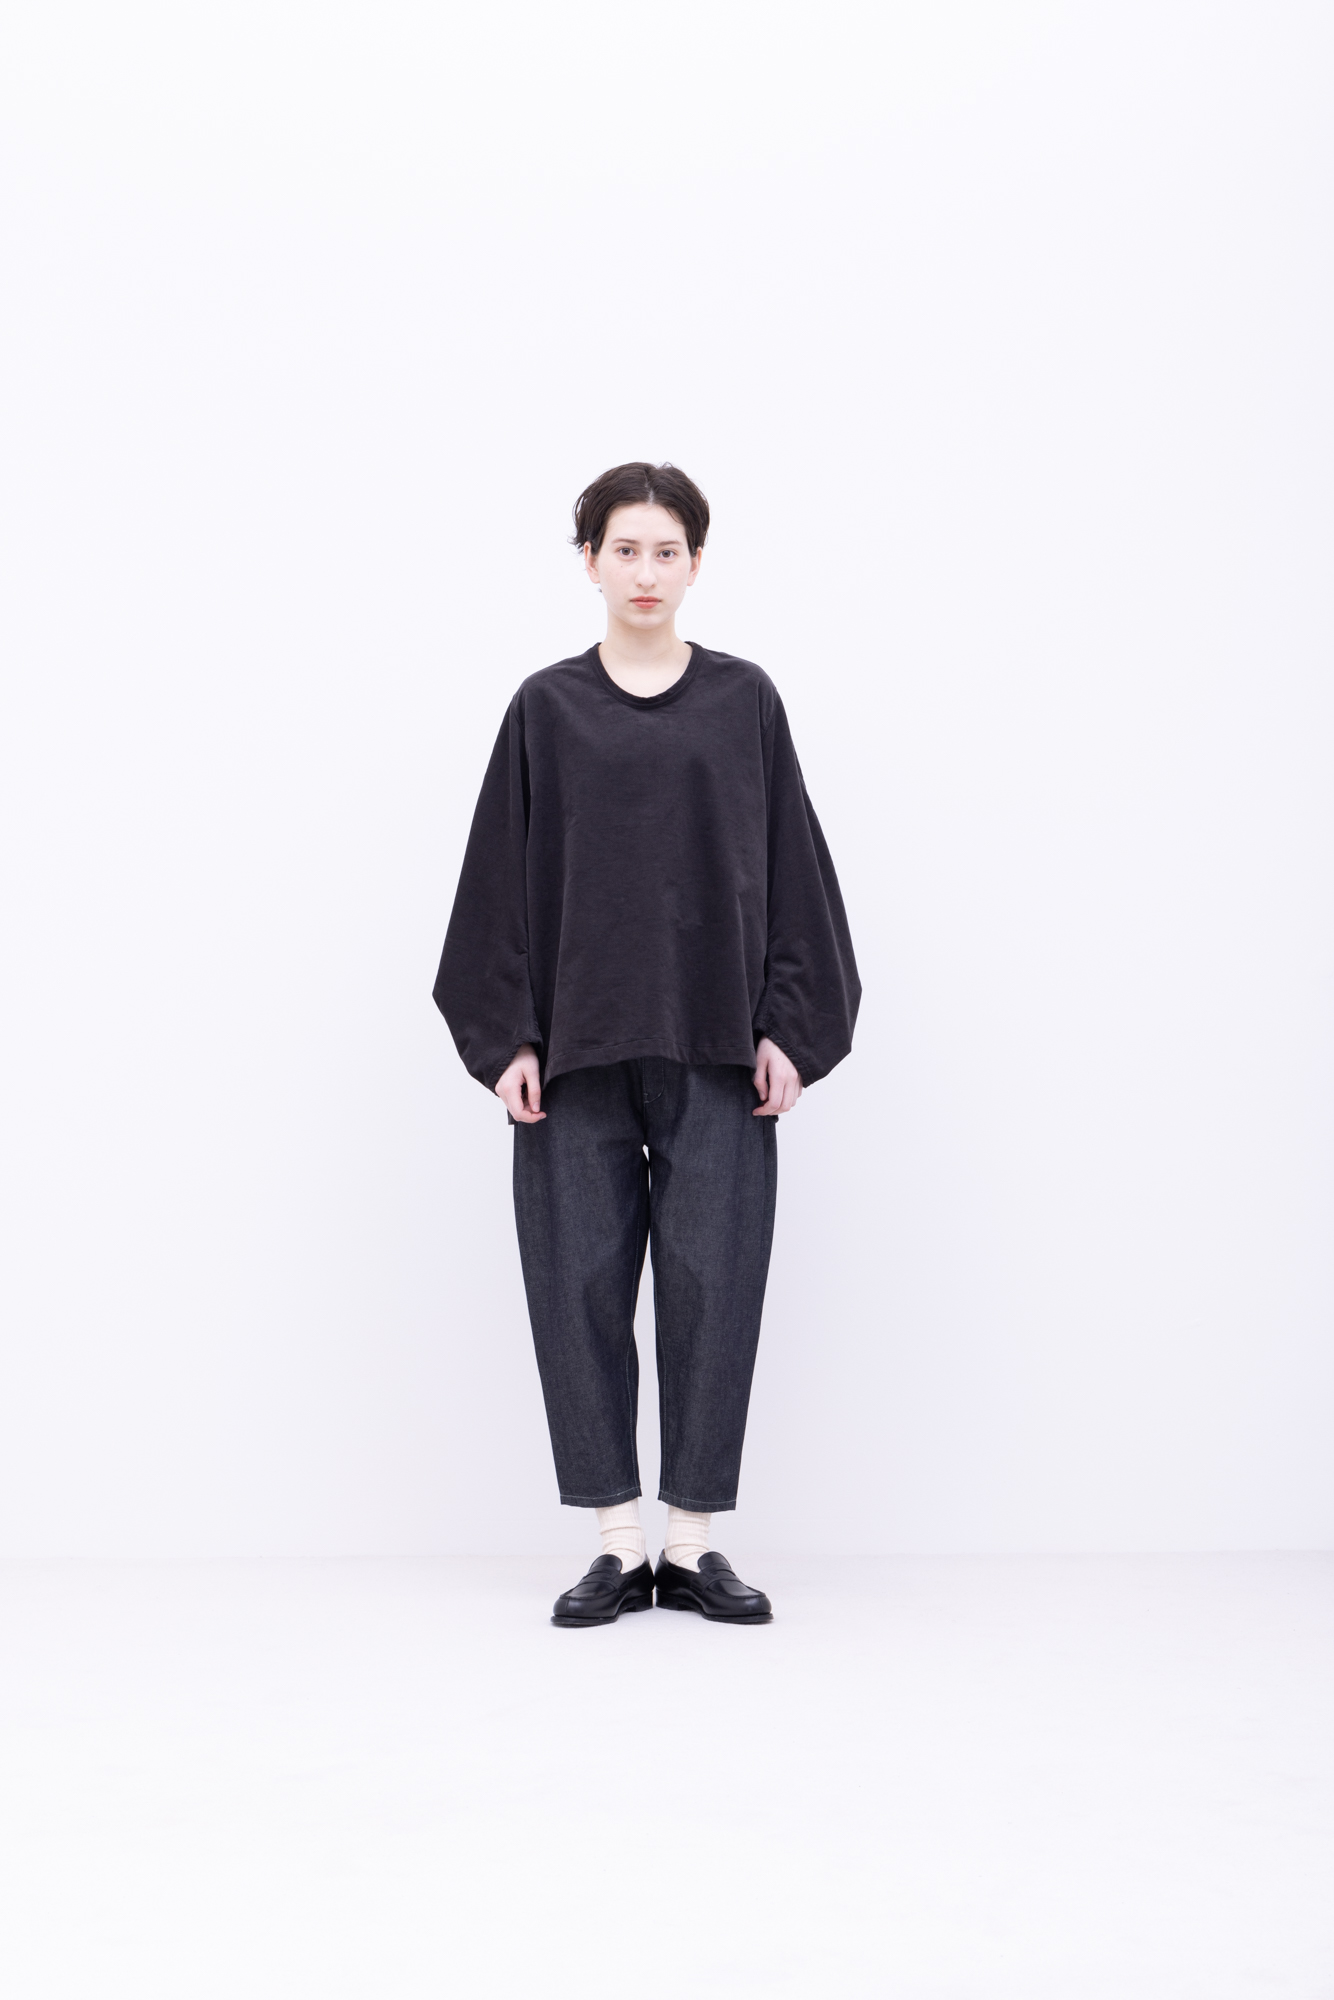 No. 106 | 2023 AW WOMENS / Model H=169cm | LOOK | FIRMUM